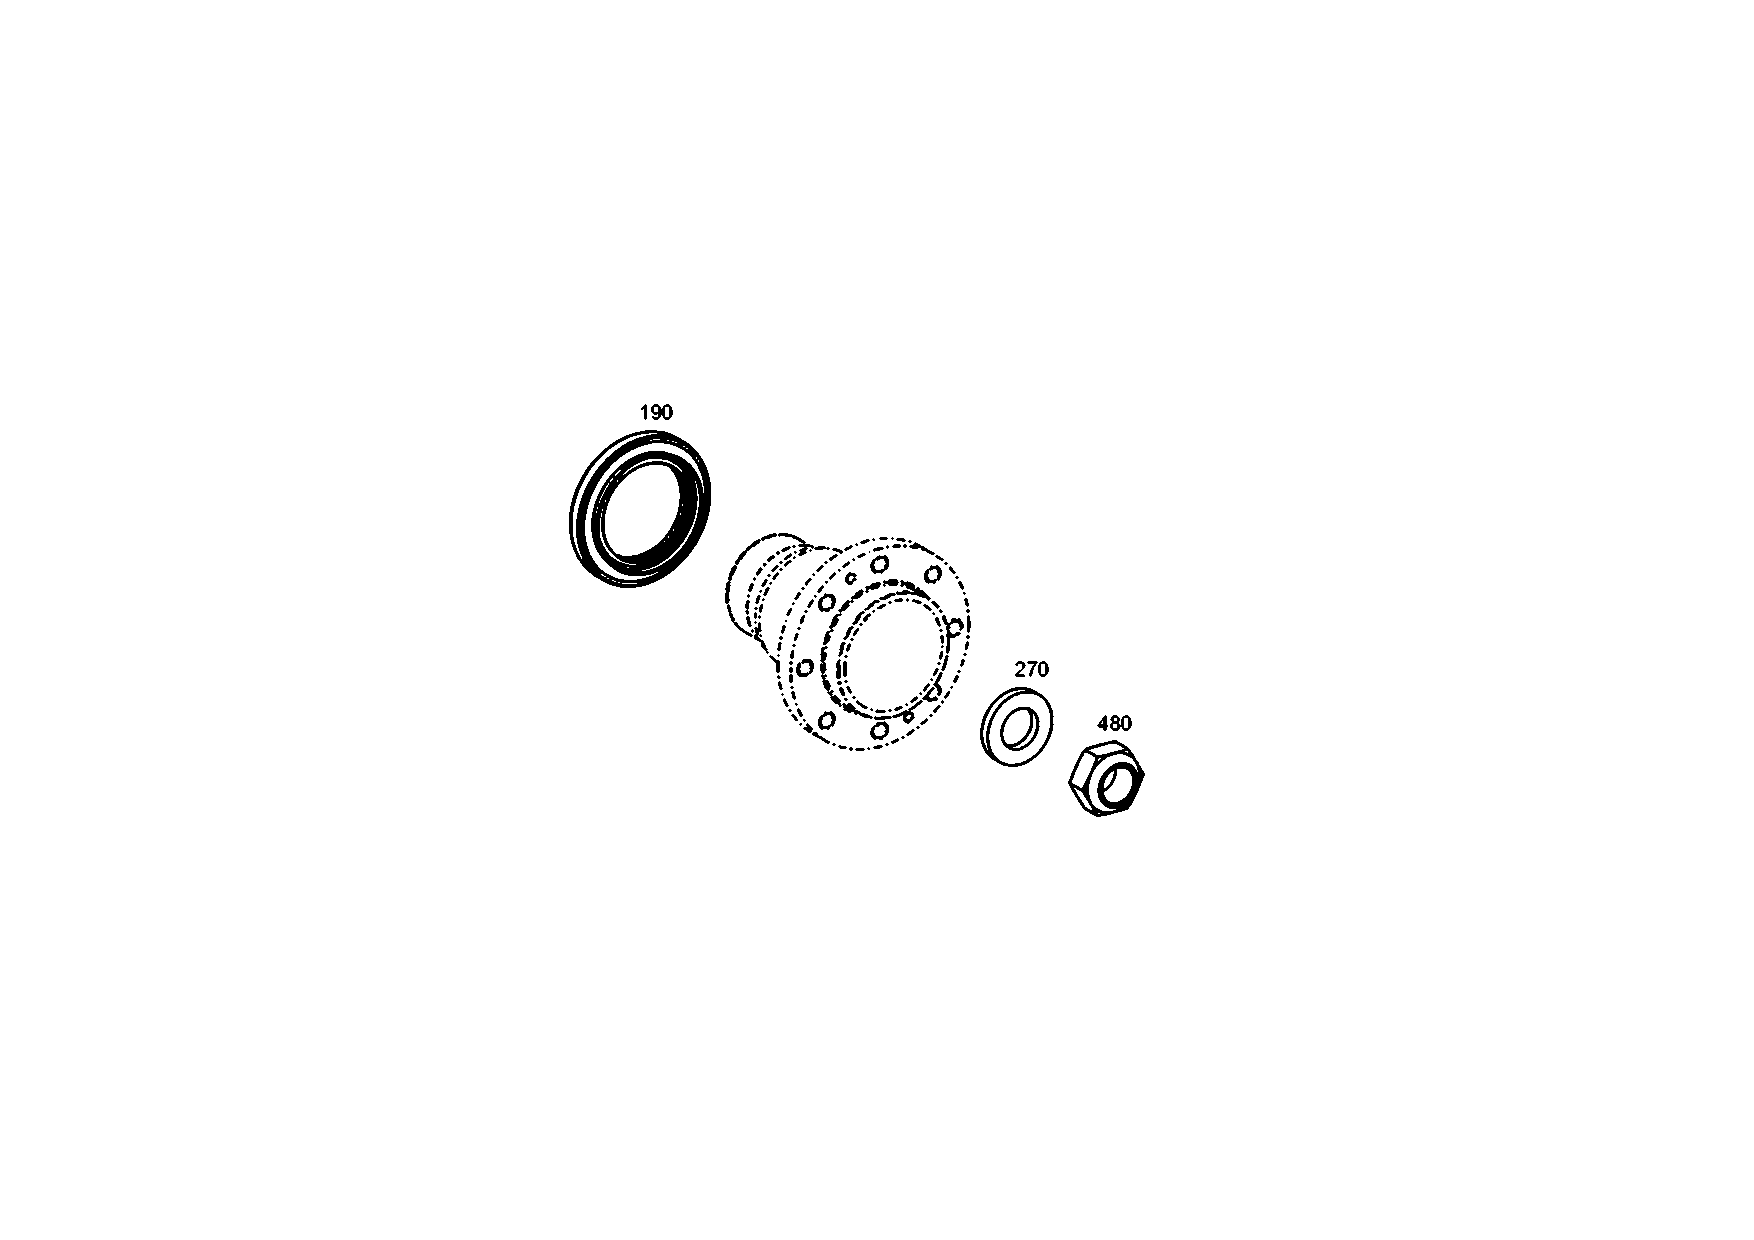 drawing for AGCO F743300021410 - SHAFT SEAL (figure 1)